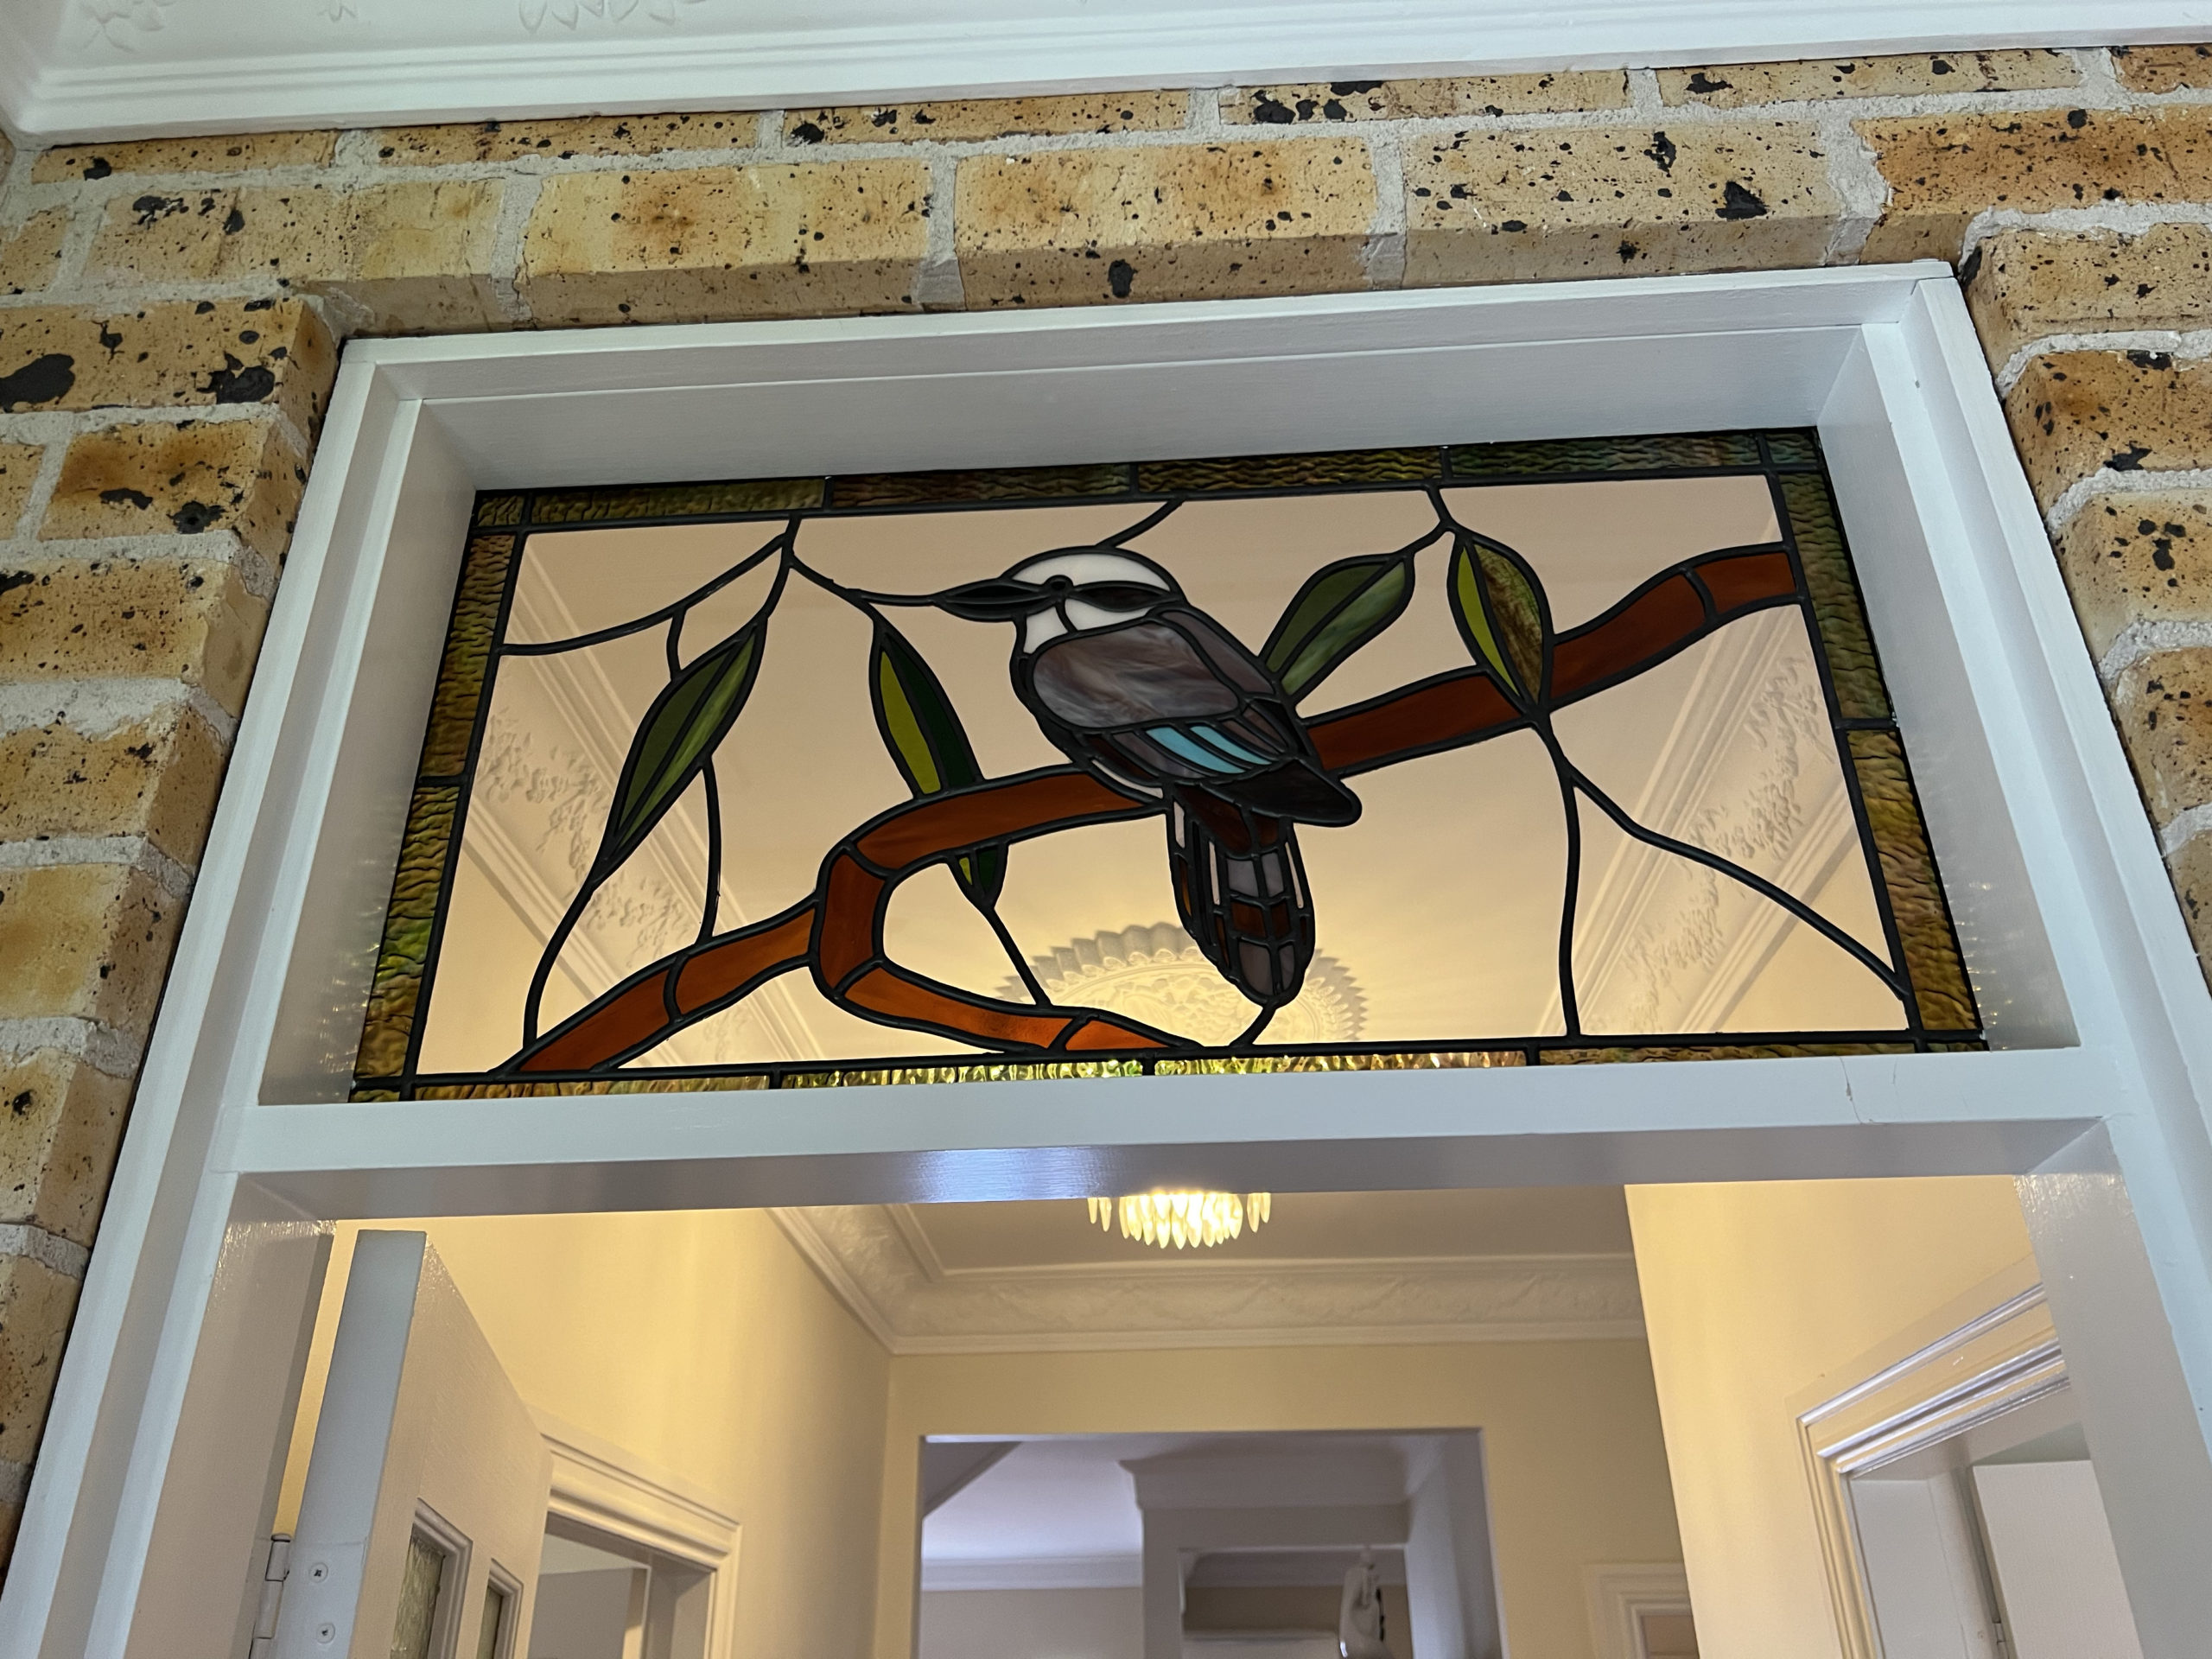 stained glass window above a door, showing a kookaburra on a branch